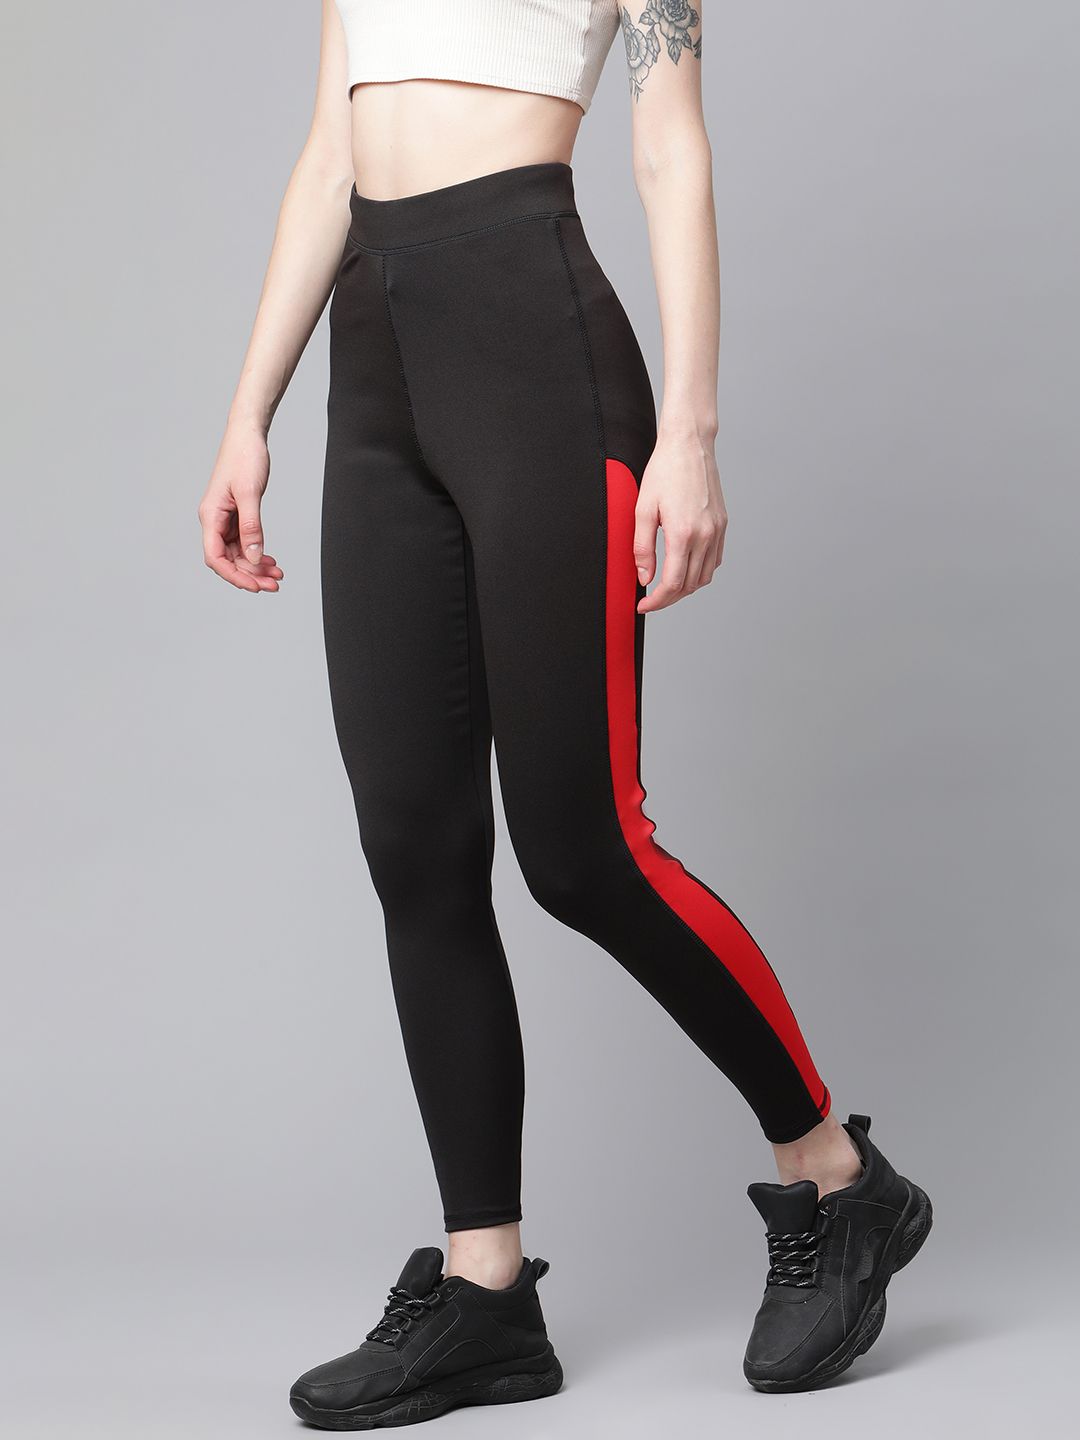 Blinkin Women Black & Red Solid High-Rise Tights with Side Taping Price in India